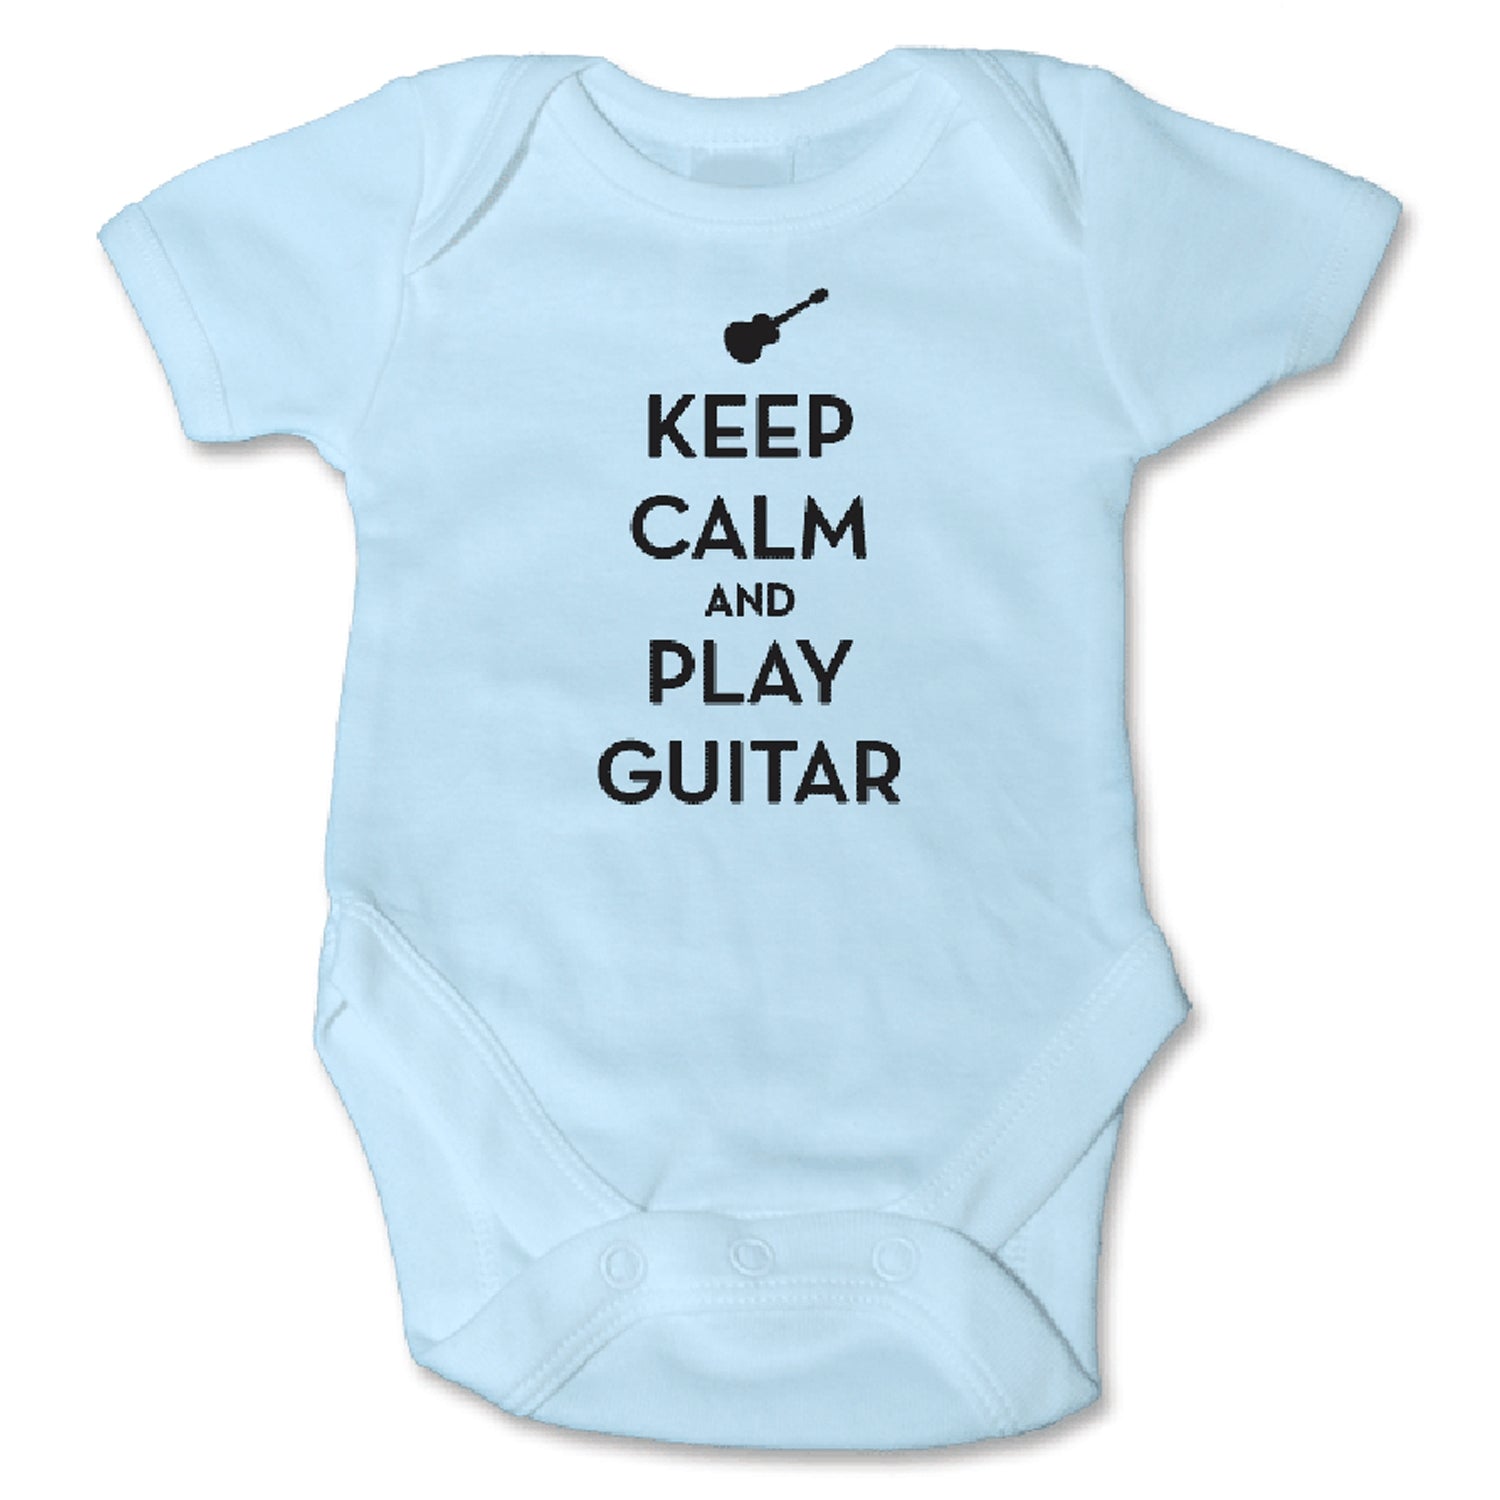 Sol Baby Keep Calm and Play Guitar Blue Bodysuit